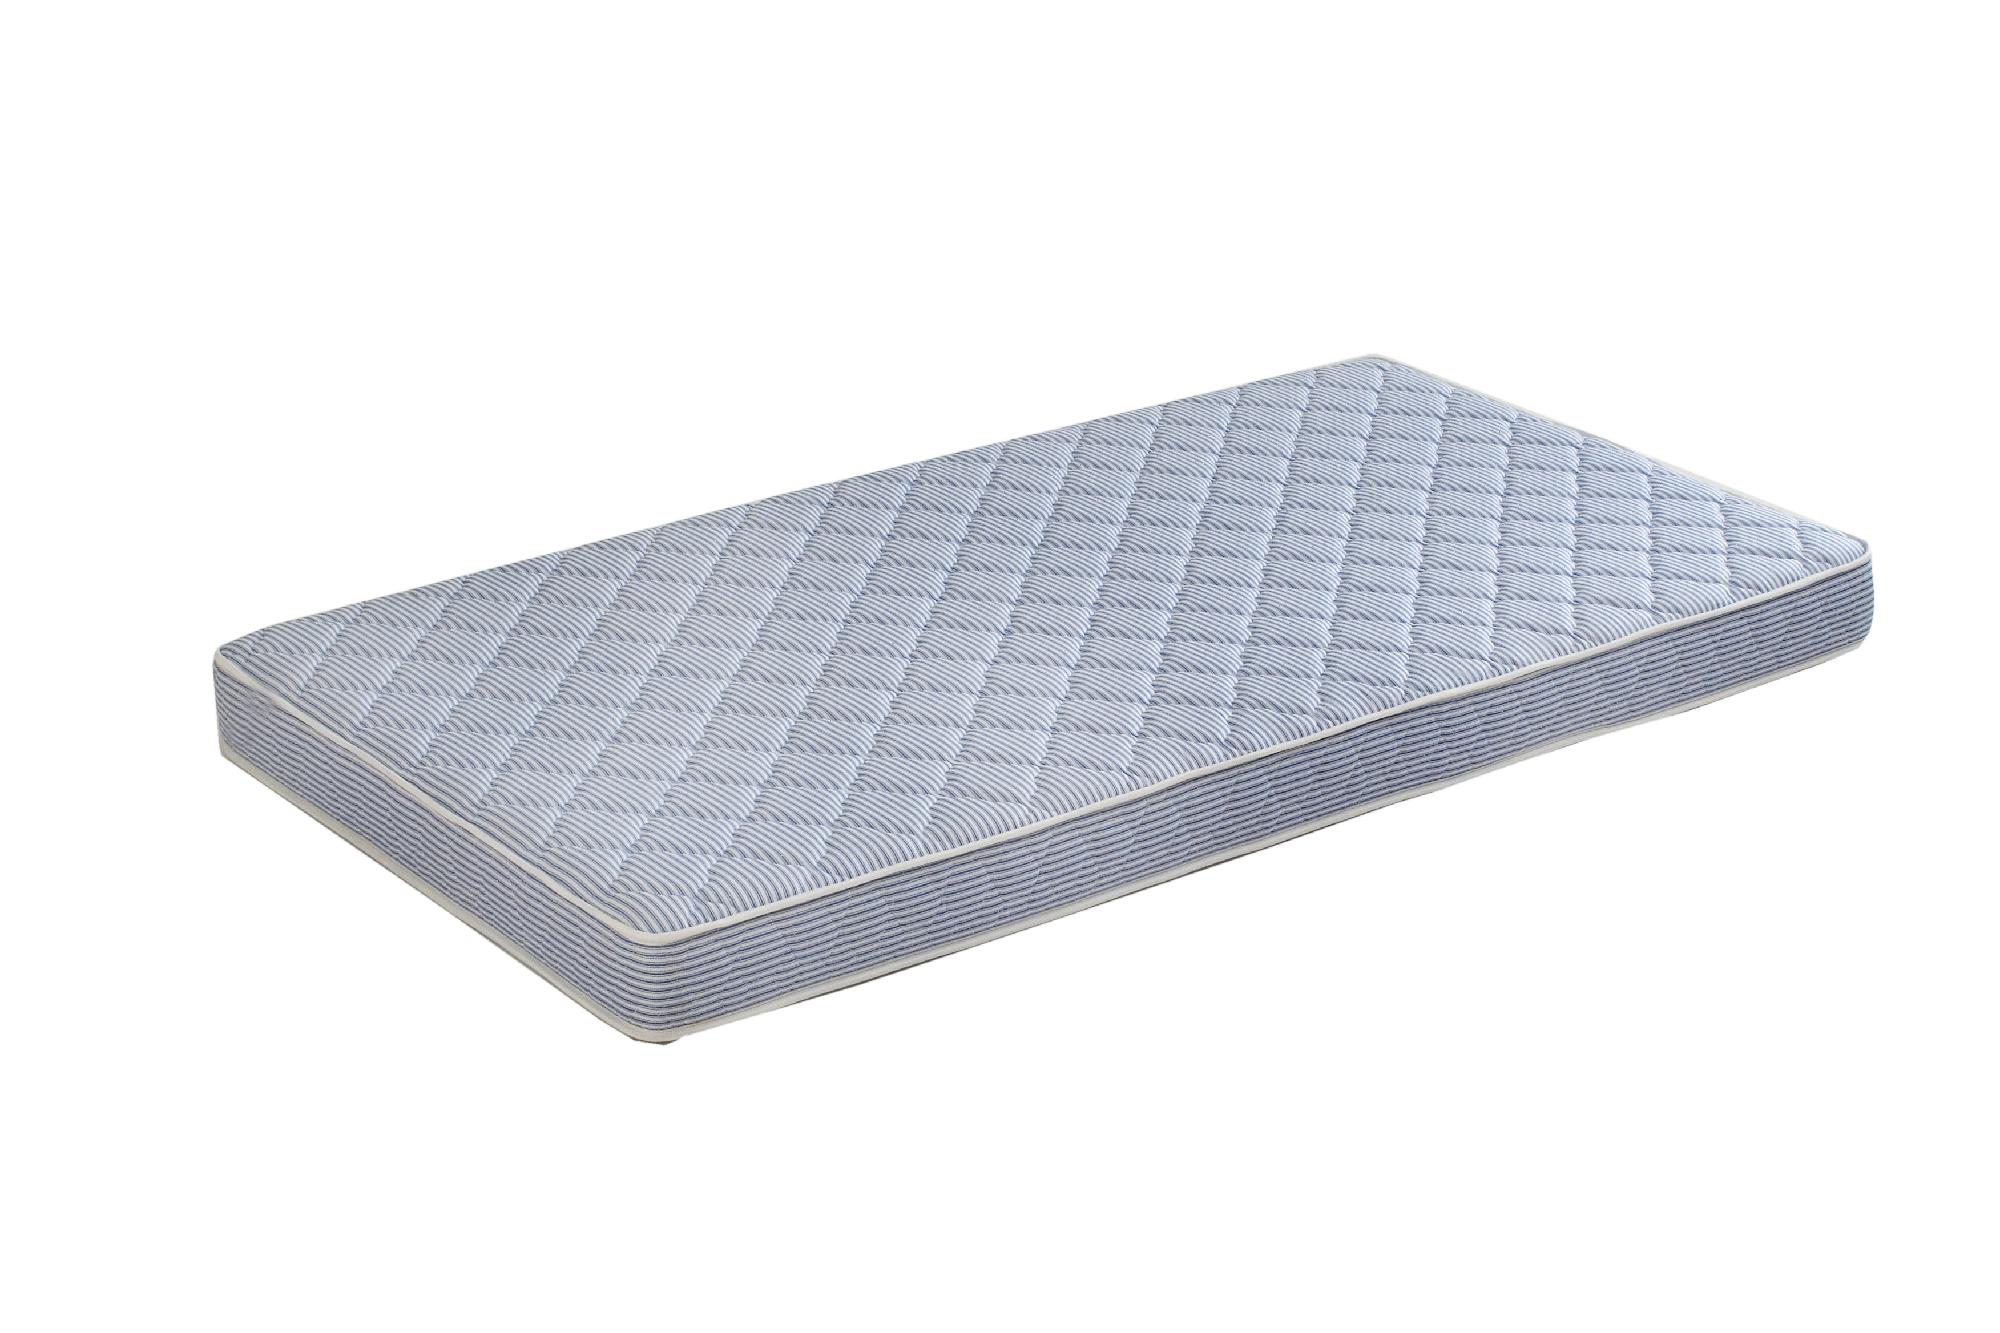 UPC 811810001039 product image for Innerspace Luxury Products 6.5-inch Truck Luxury Reversible Mattress Only - Quil | upcitemdb.com